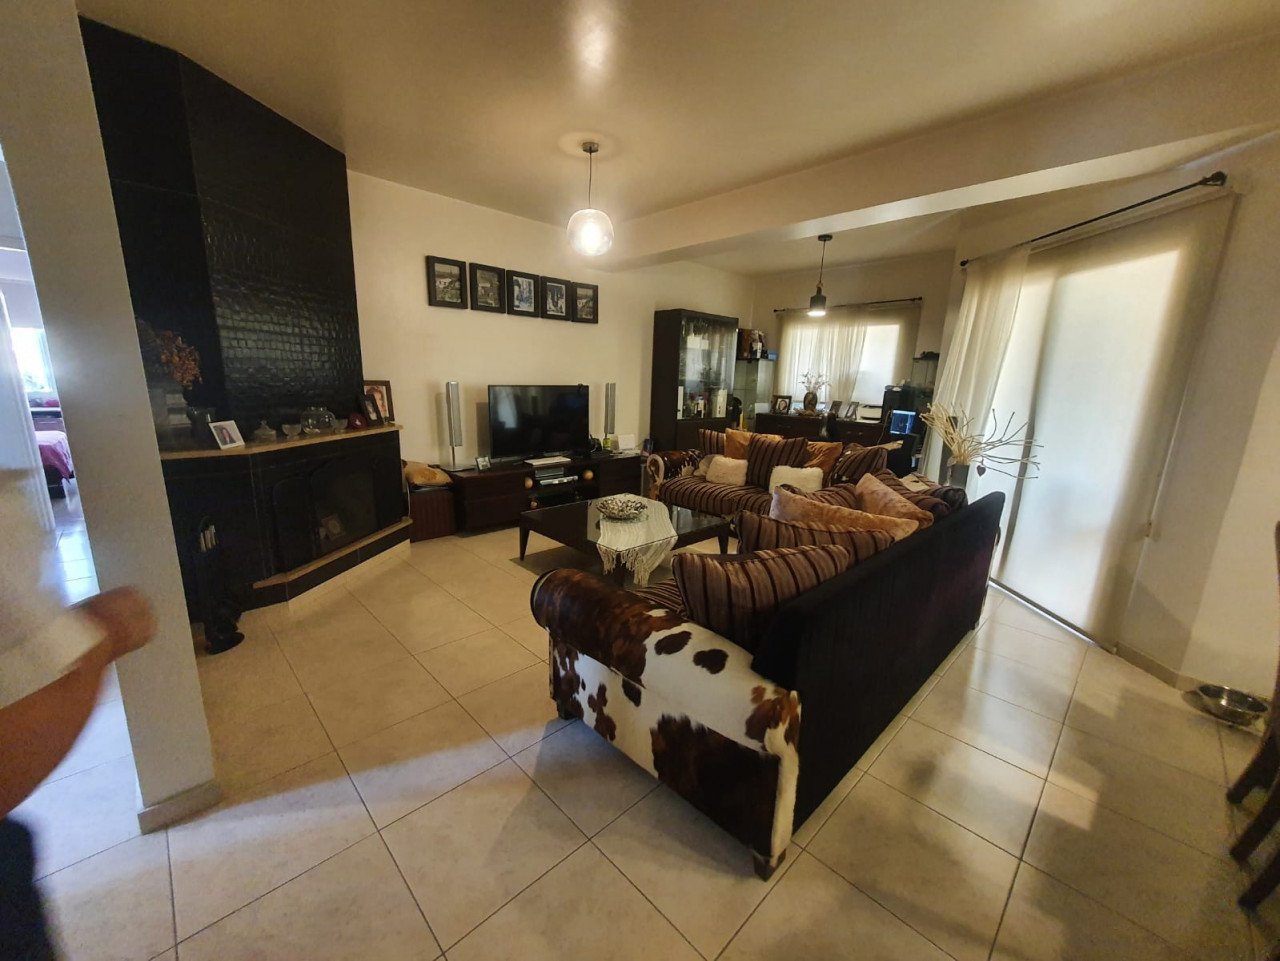 Property for Rent: Apartment (Penthouse) in City Center, Paphos for Rent | Key Realtor Cyprus